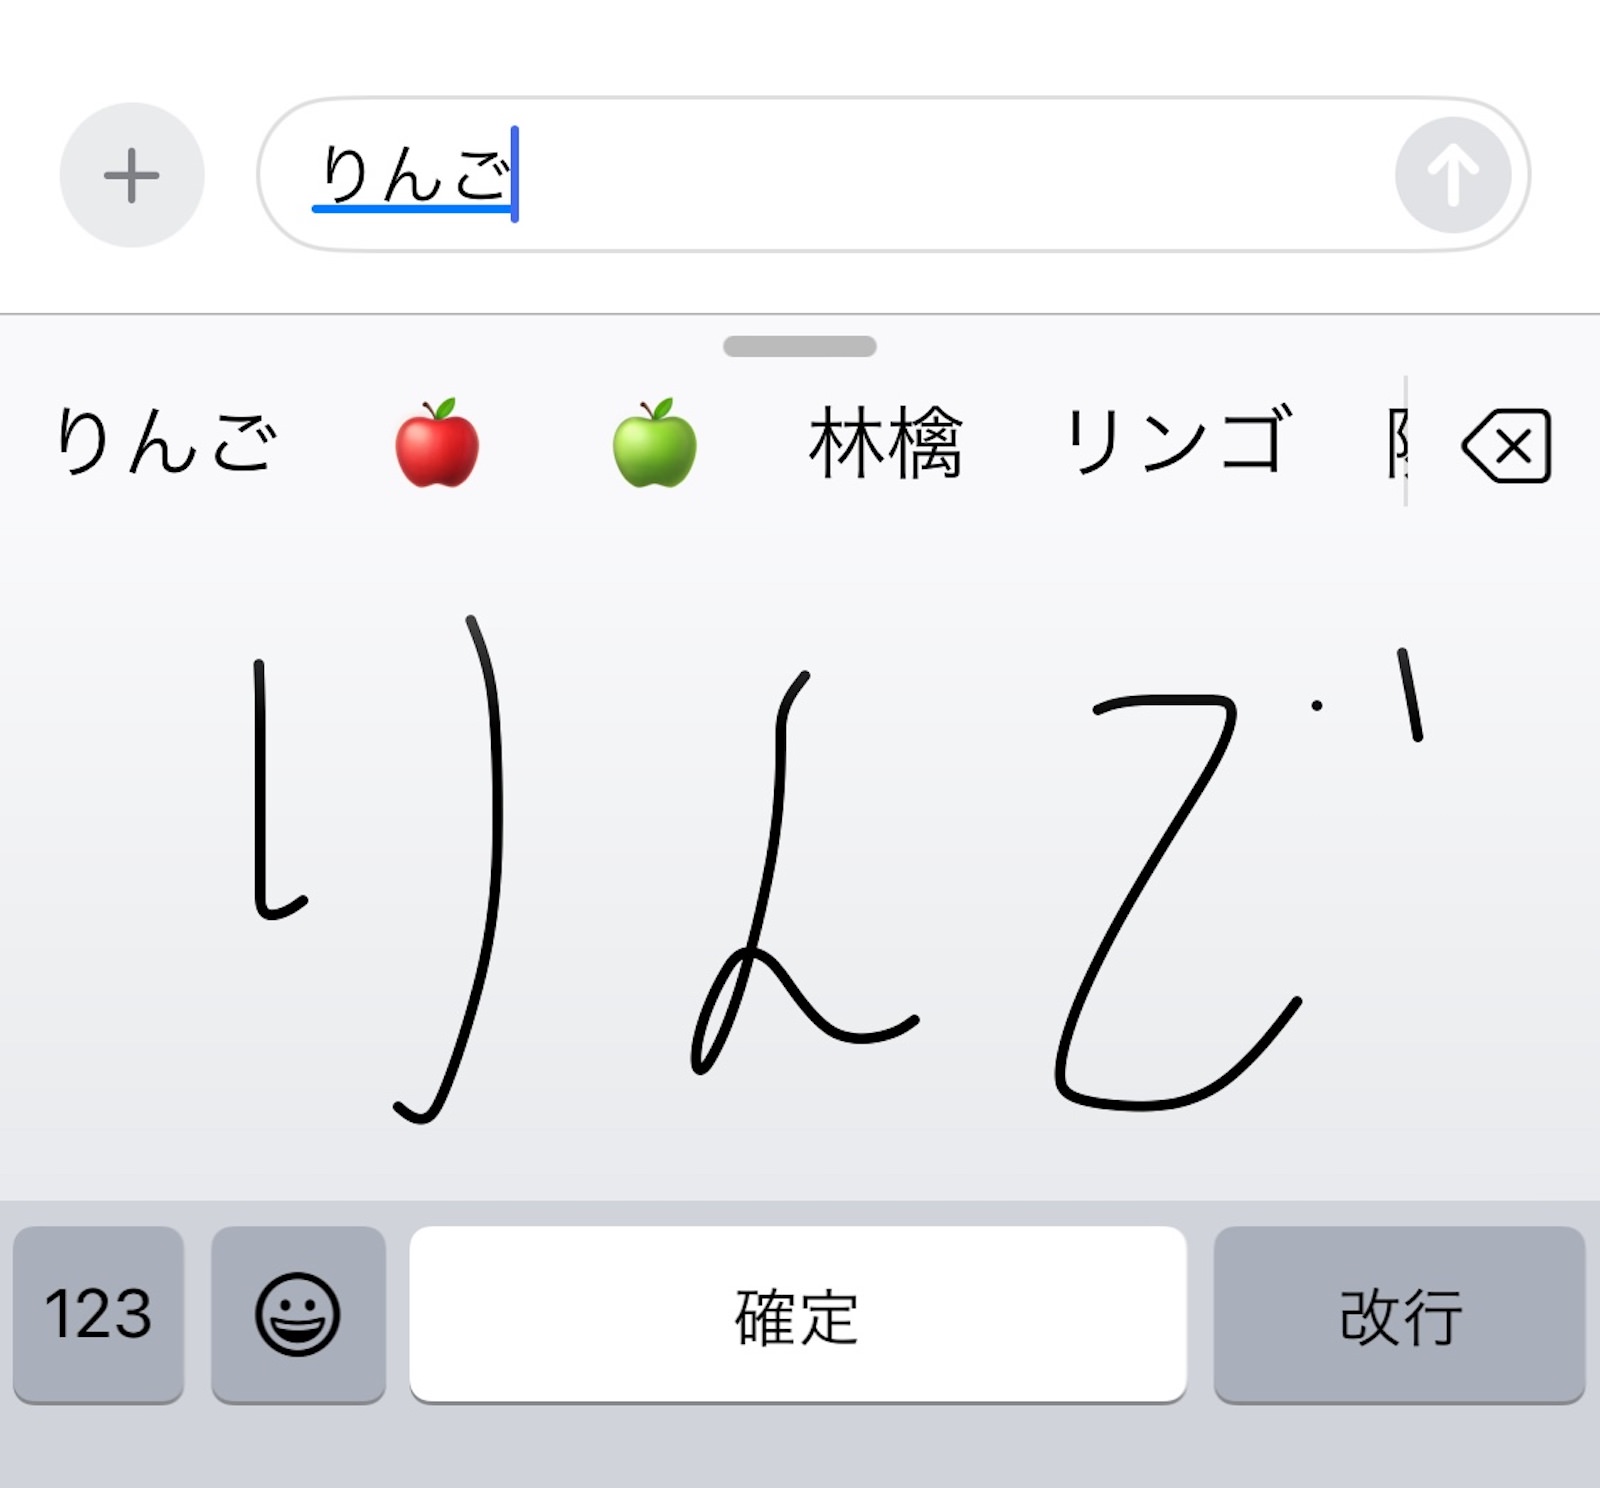 Japanese input compatible